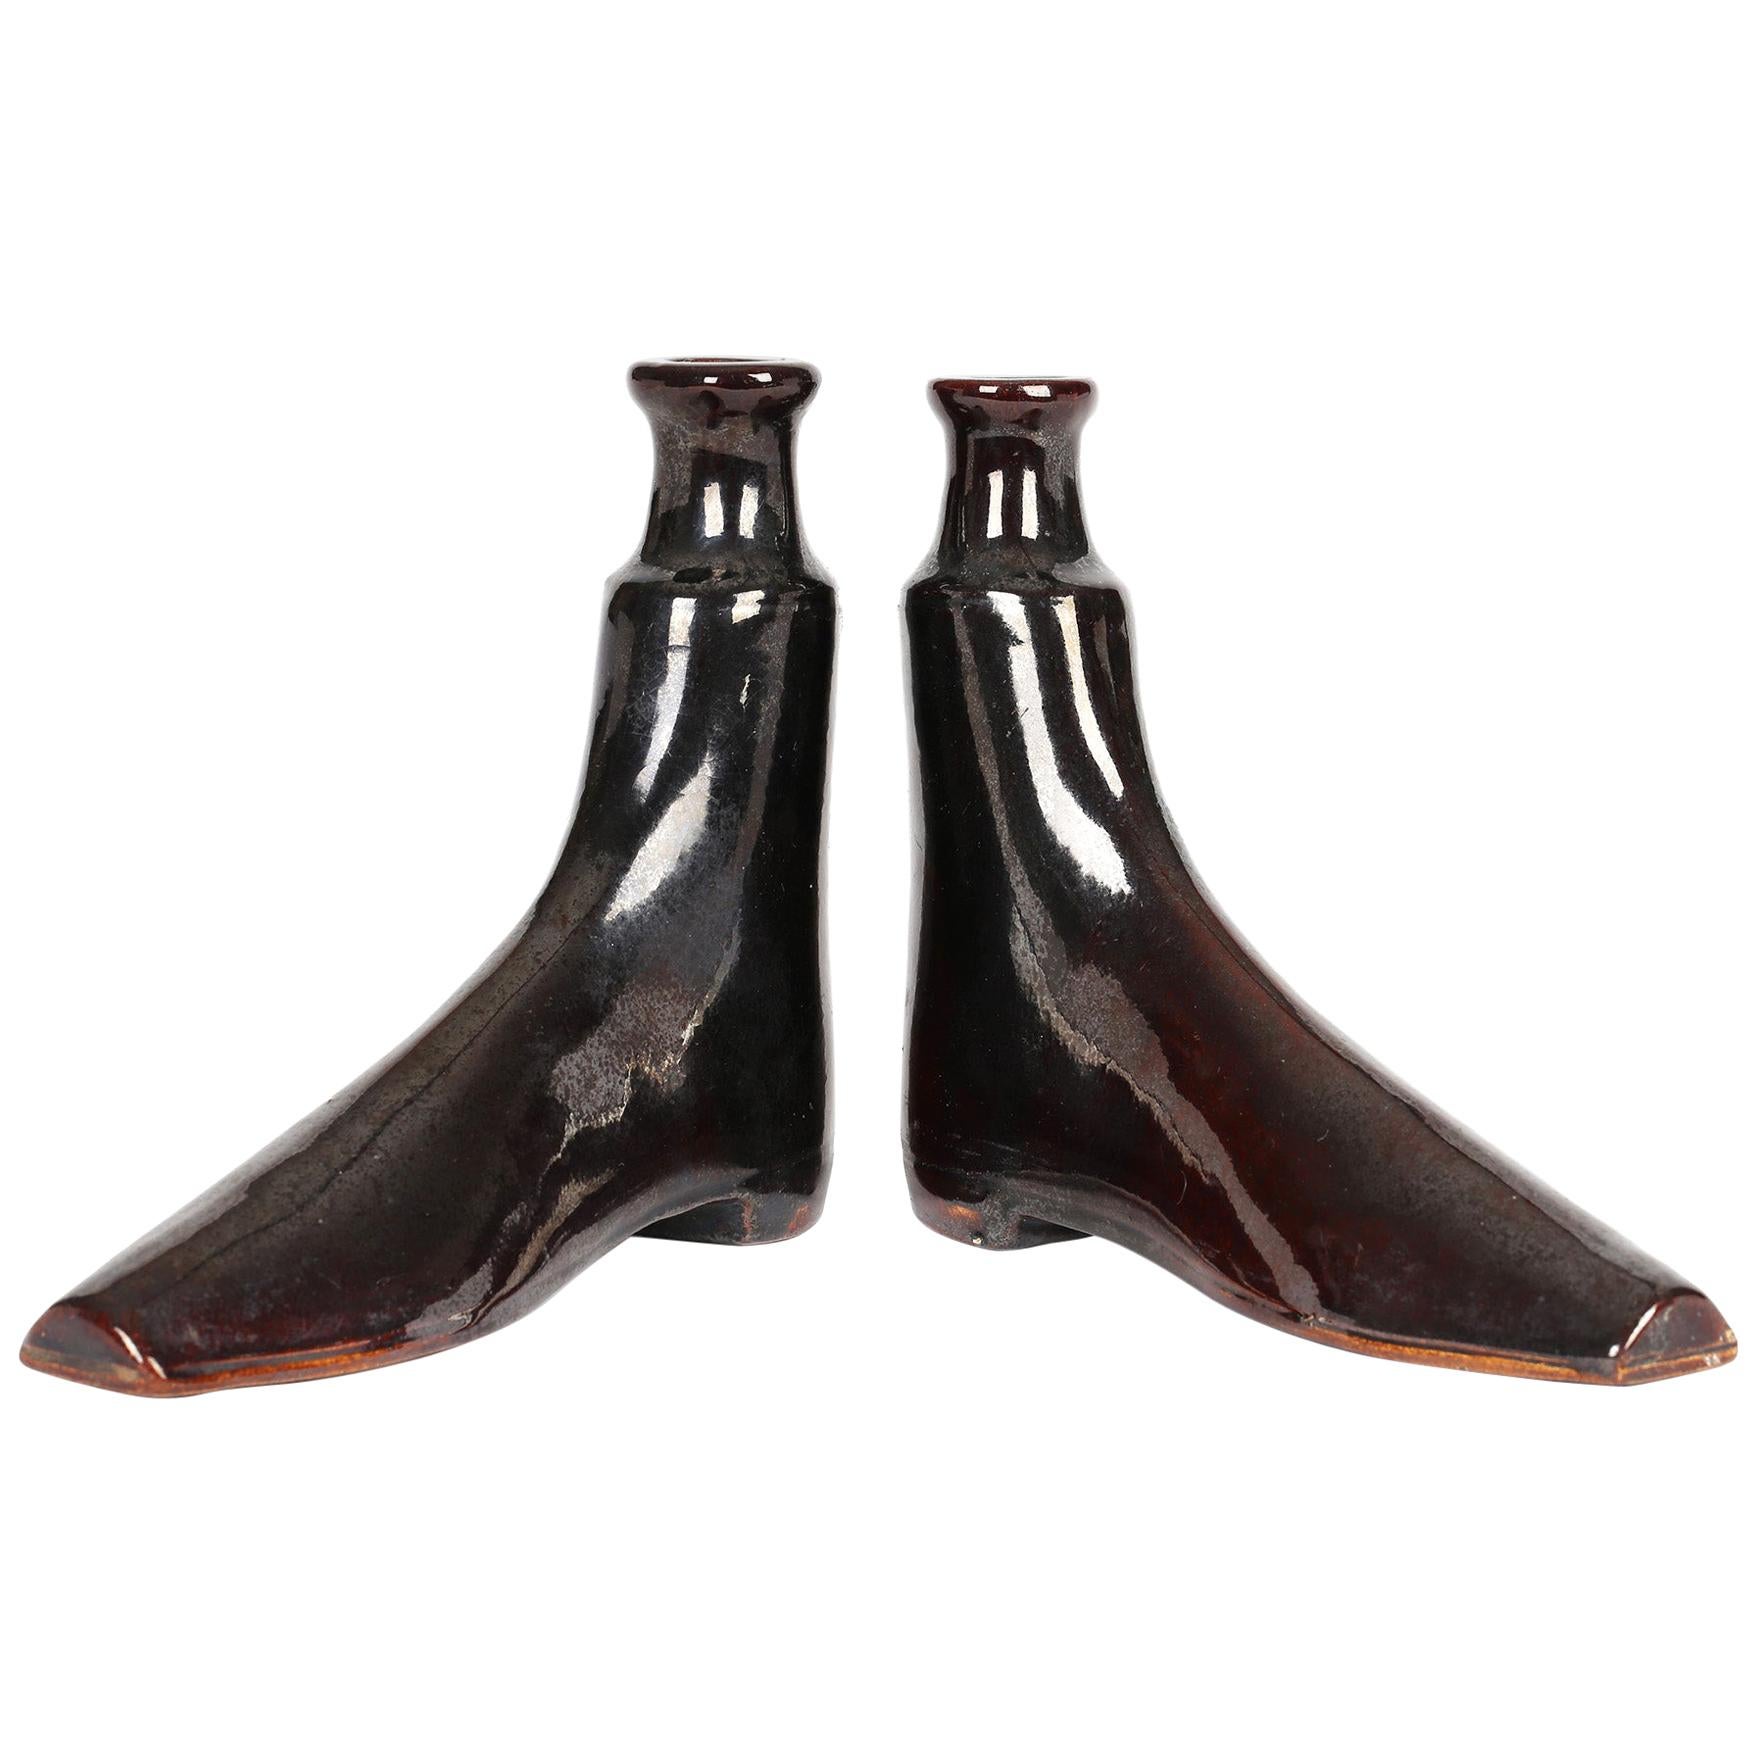 Pair of Antique English Treacle Glazed Pottery Boot Shaped Spirit Flasks